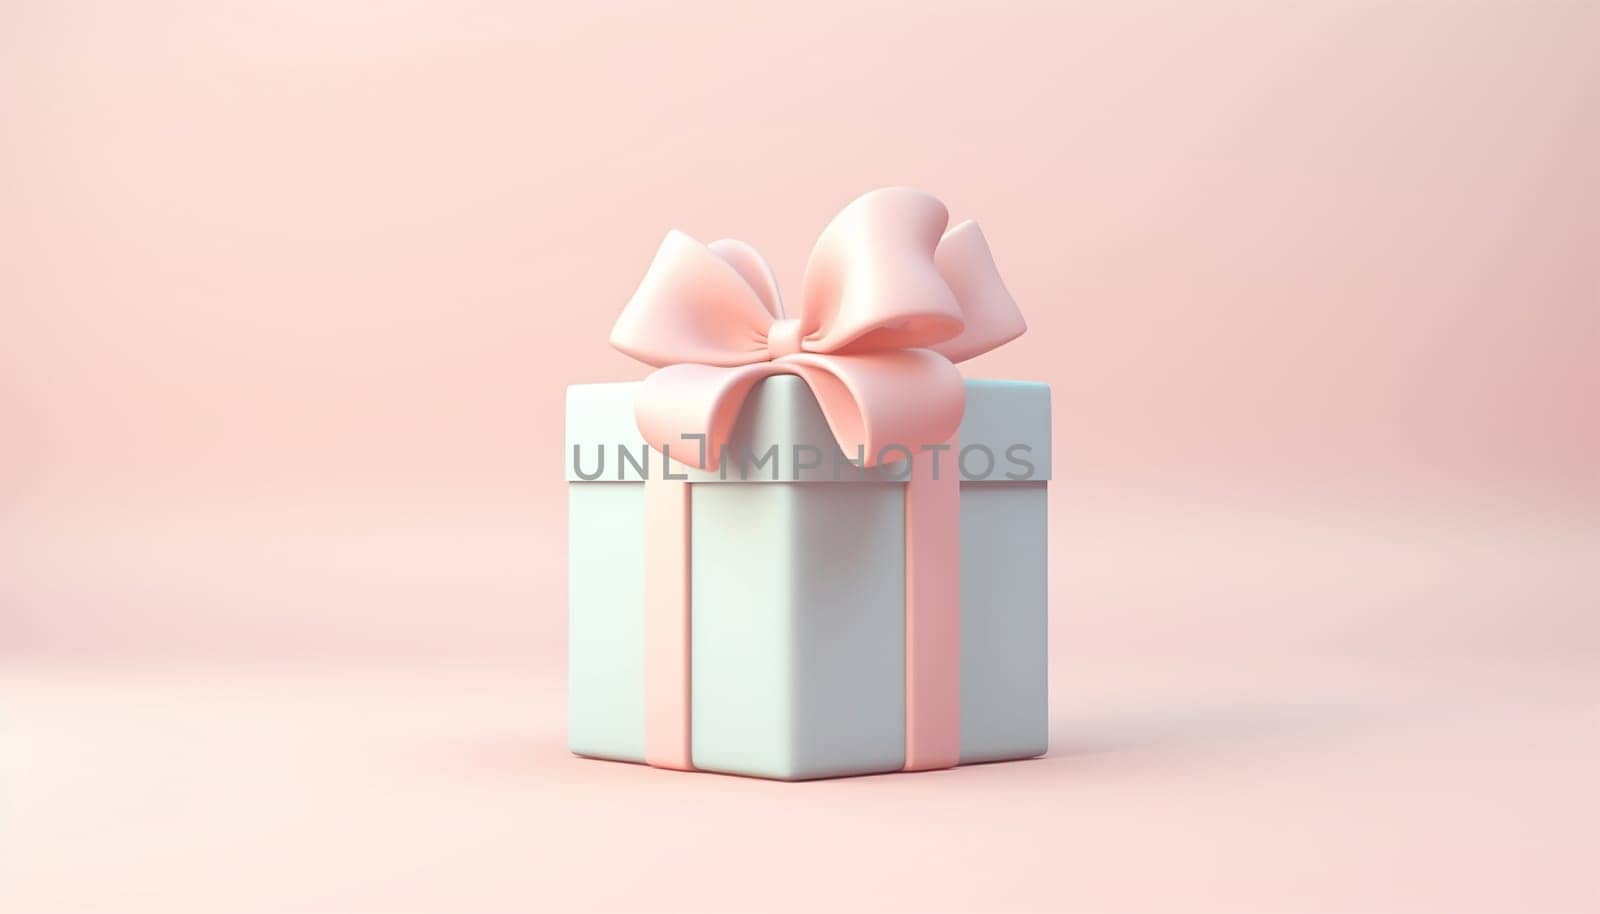 3d pastel closed gift box standing on the floor with pastel ribbon bow isolated on a light background. 3d render modern holiday surprise box. Realistic cute icon. Valentine,Birthday,present concept design by Annebel146